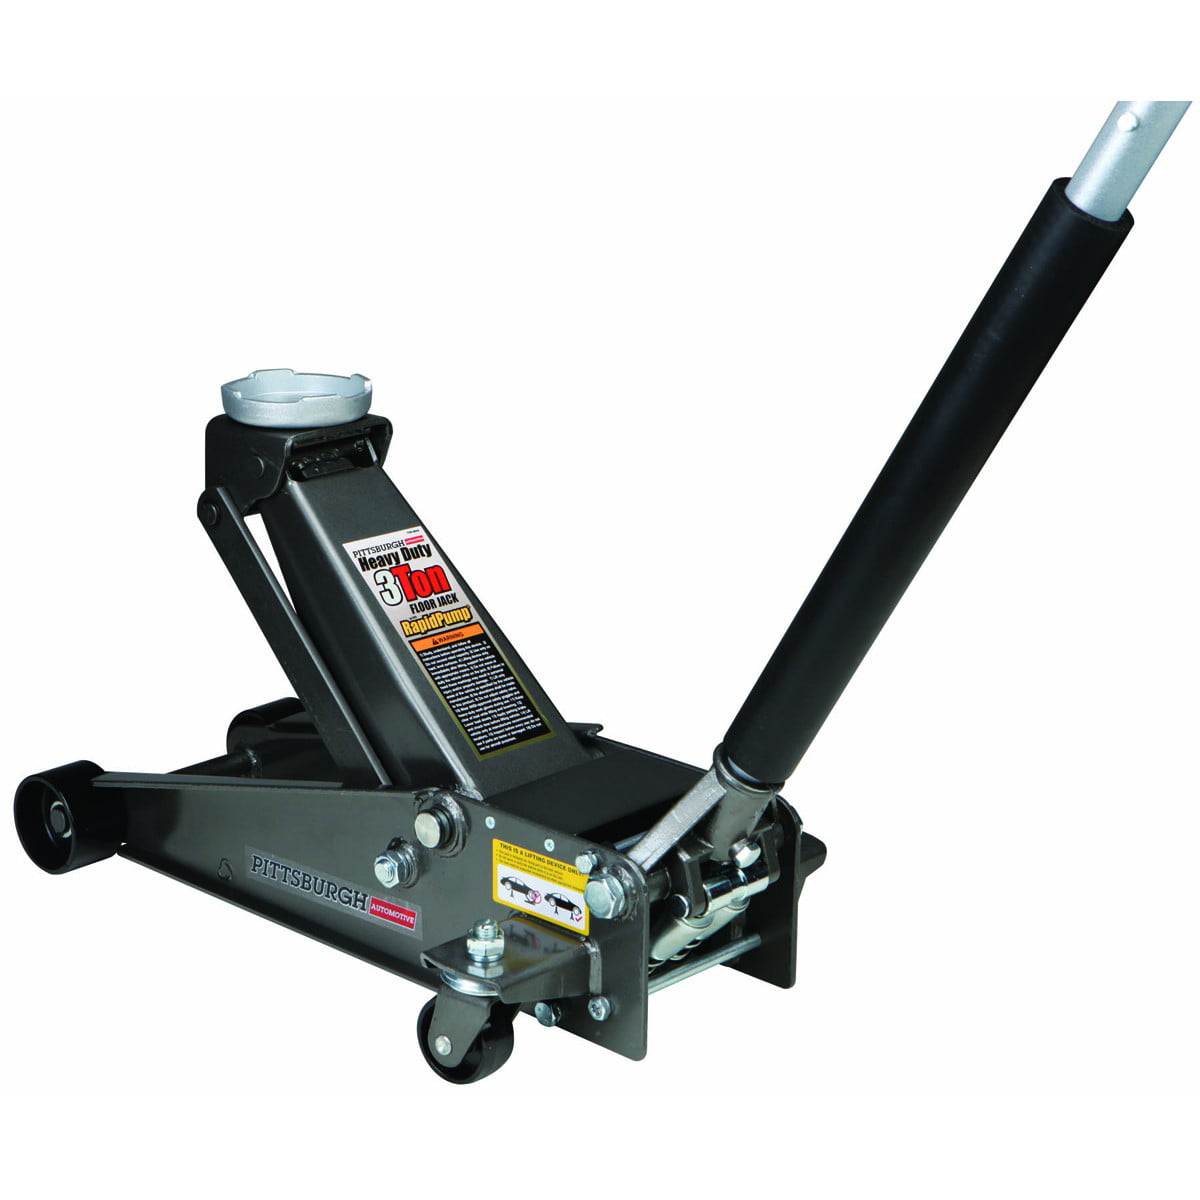 Details about   3 Ton Steel Heavy Duty Floor Jack with Rapid Pump Garage Shop Home Lifting Jack